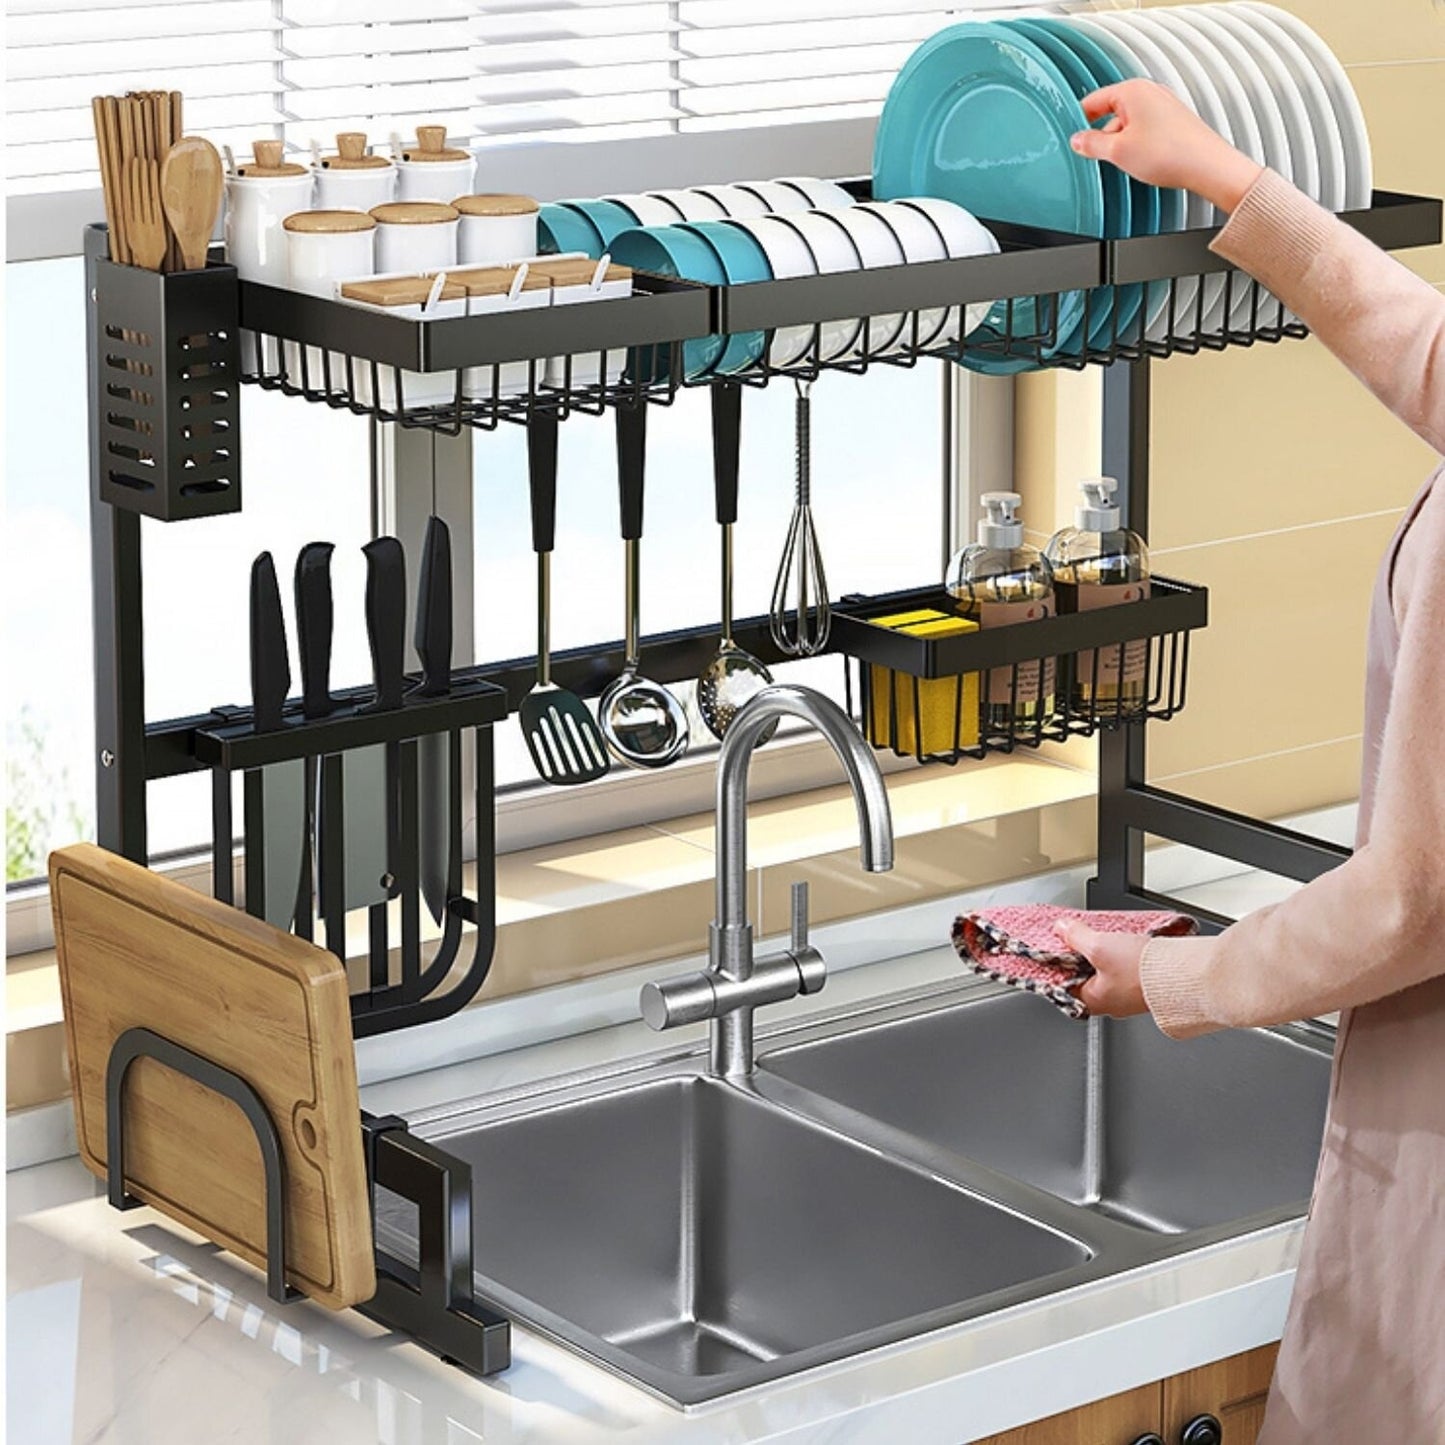 Toolkiss Dish Drying Rack - Giveaway A